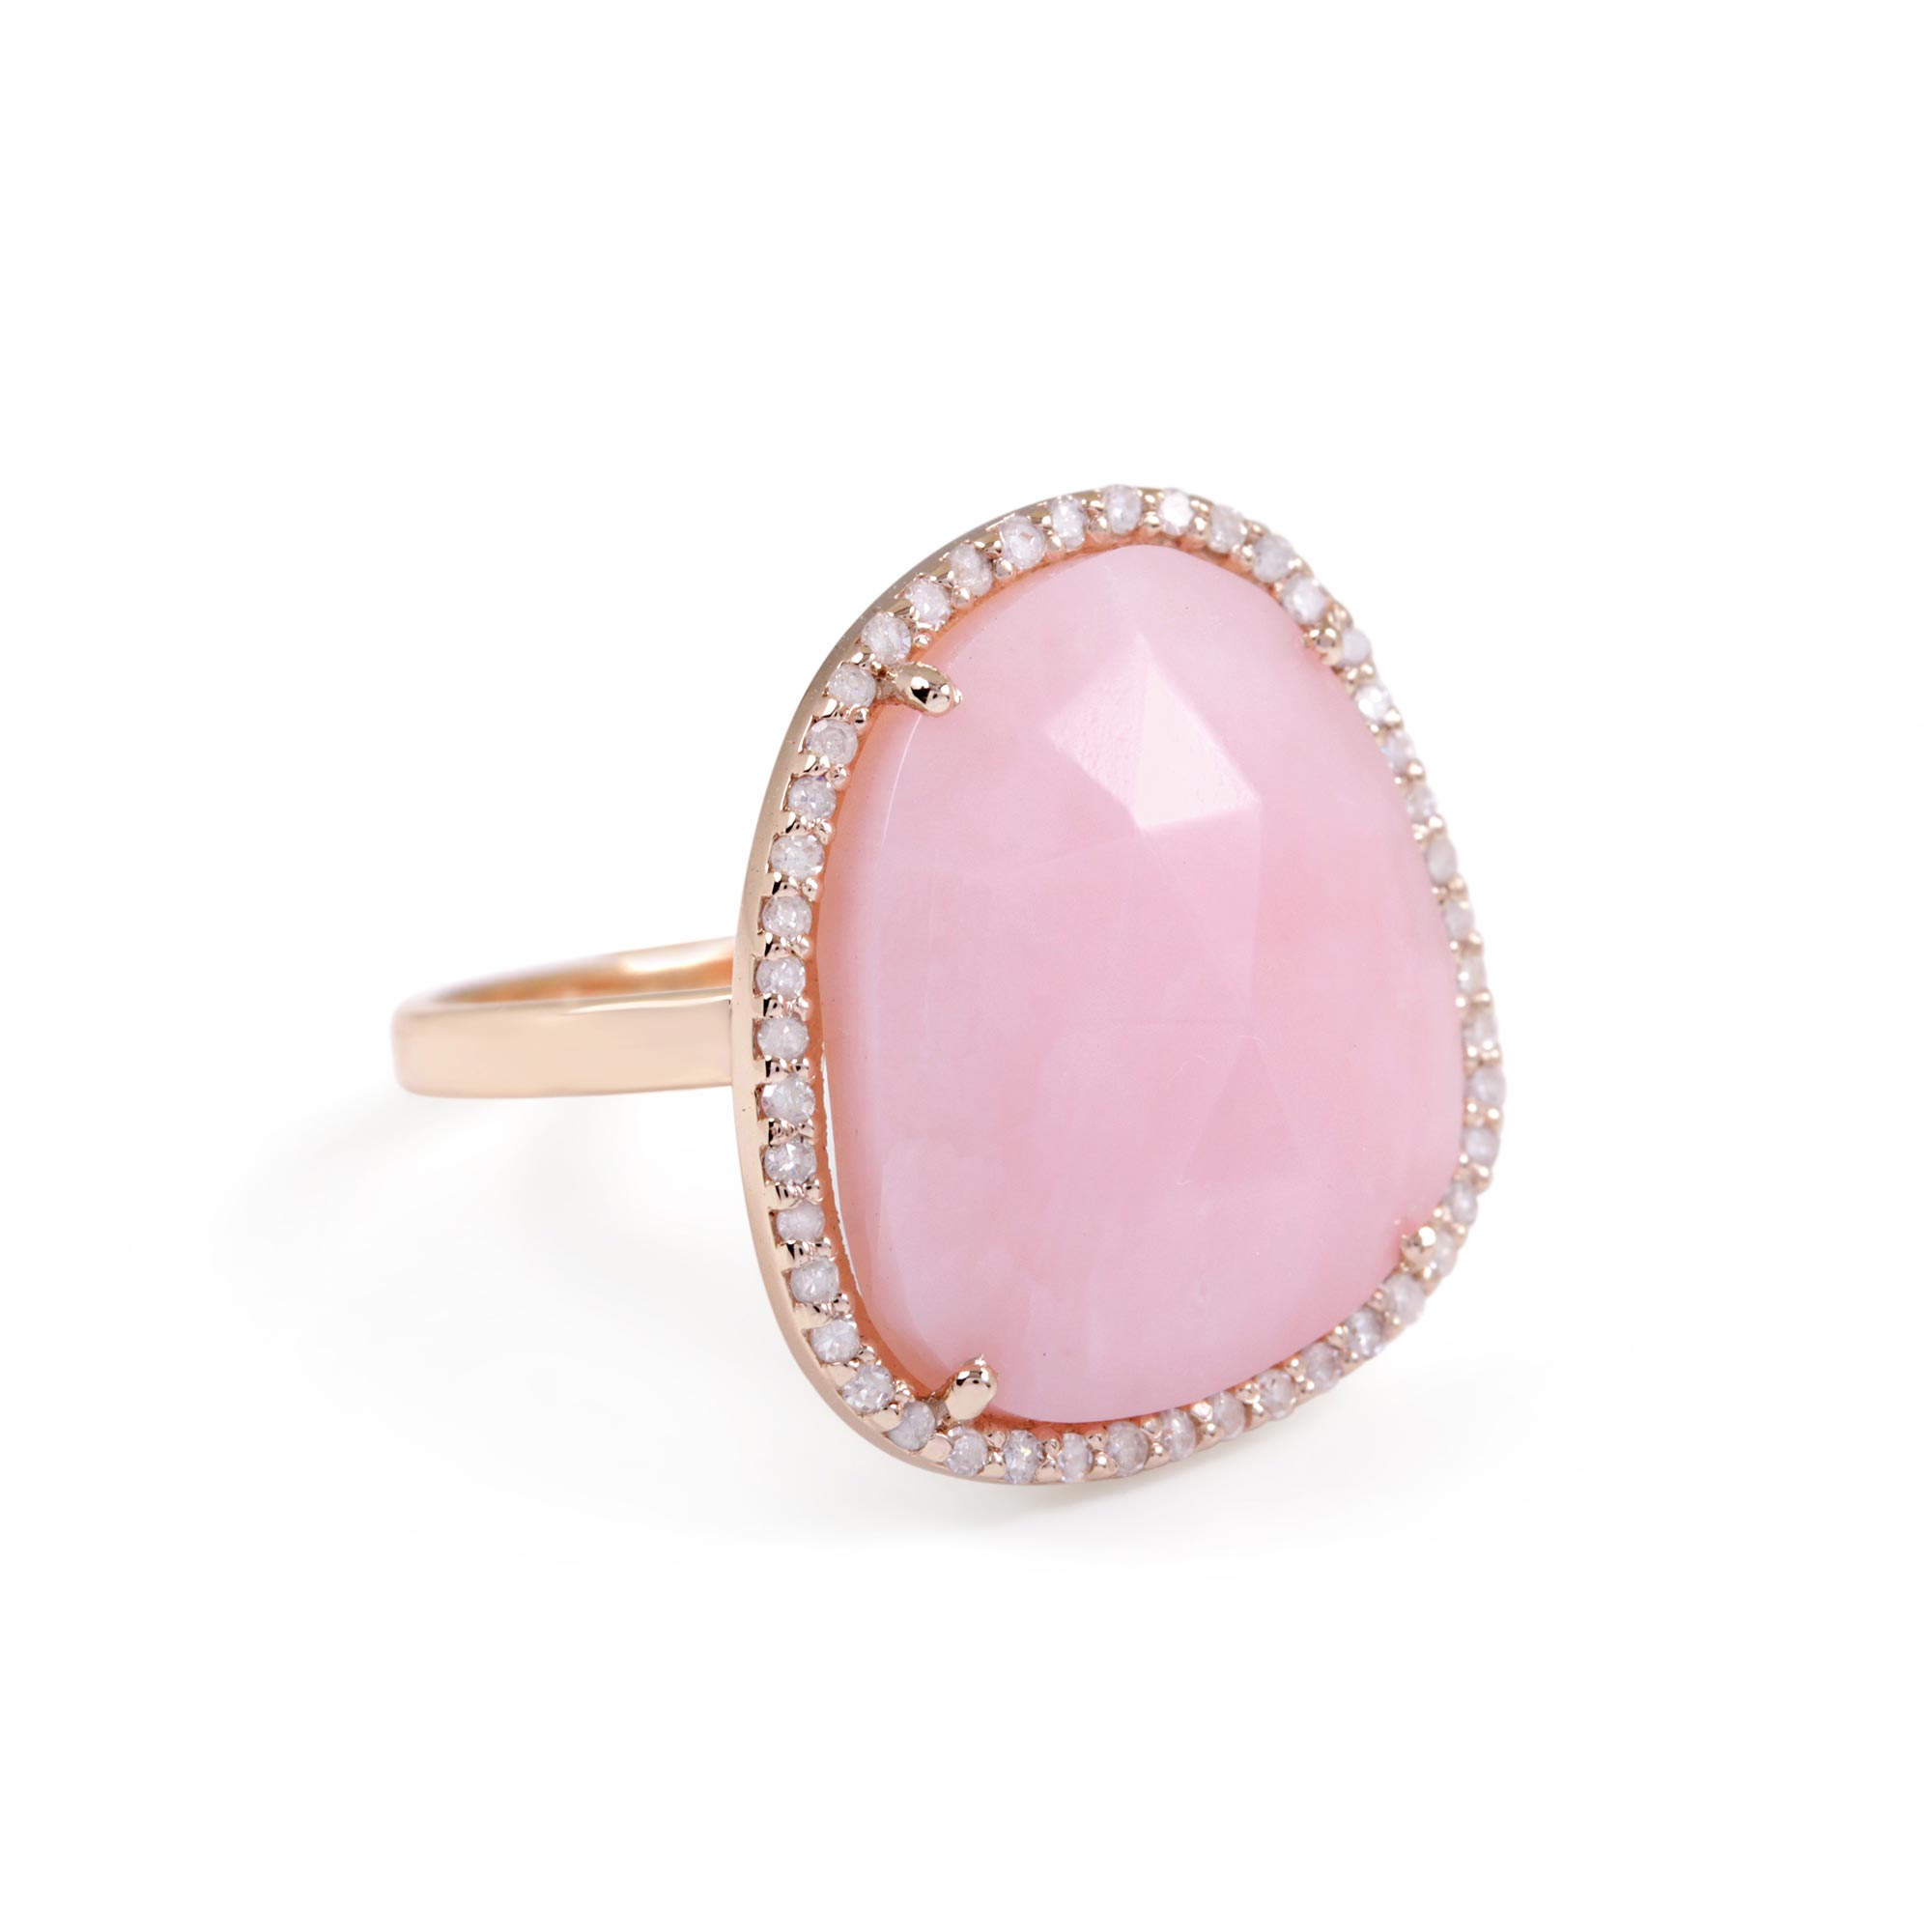 14K Solid Gold Natural Pave Diamond Ring Pink Opal Gemstone Jewelry